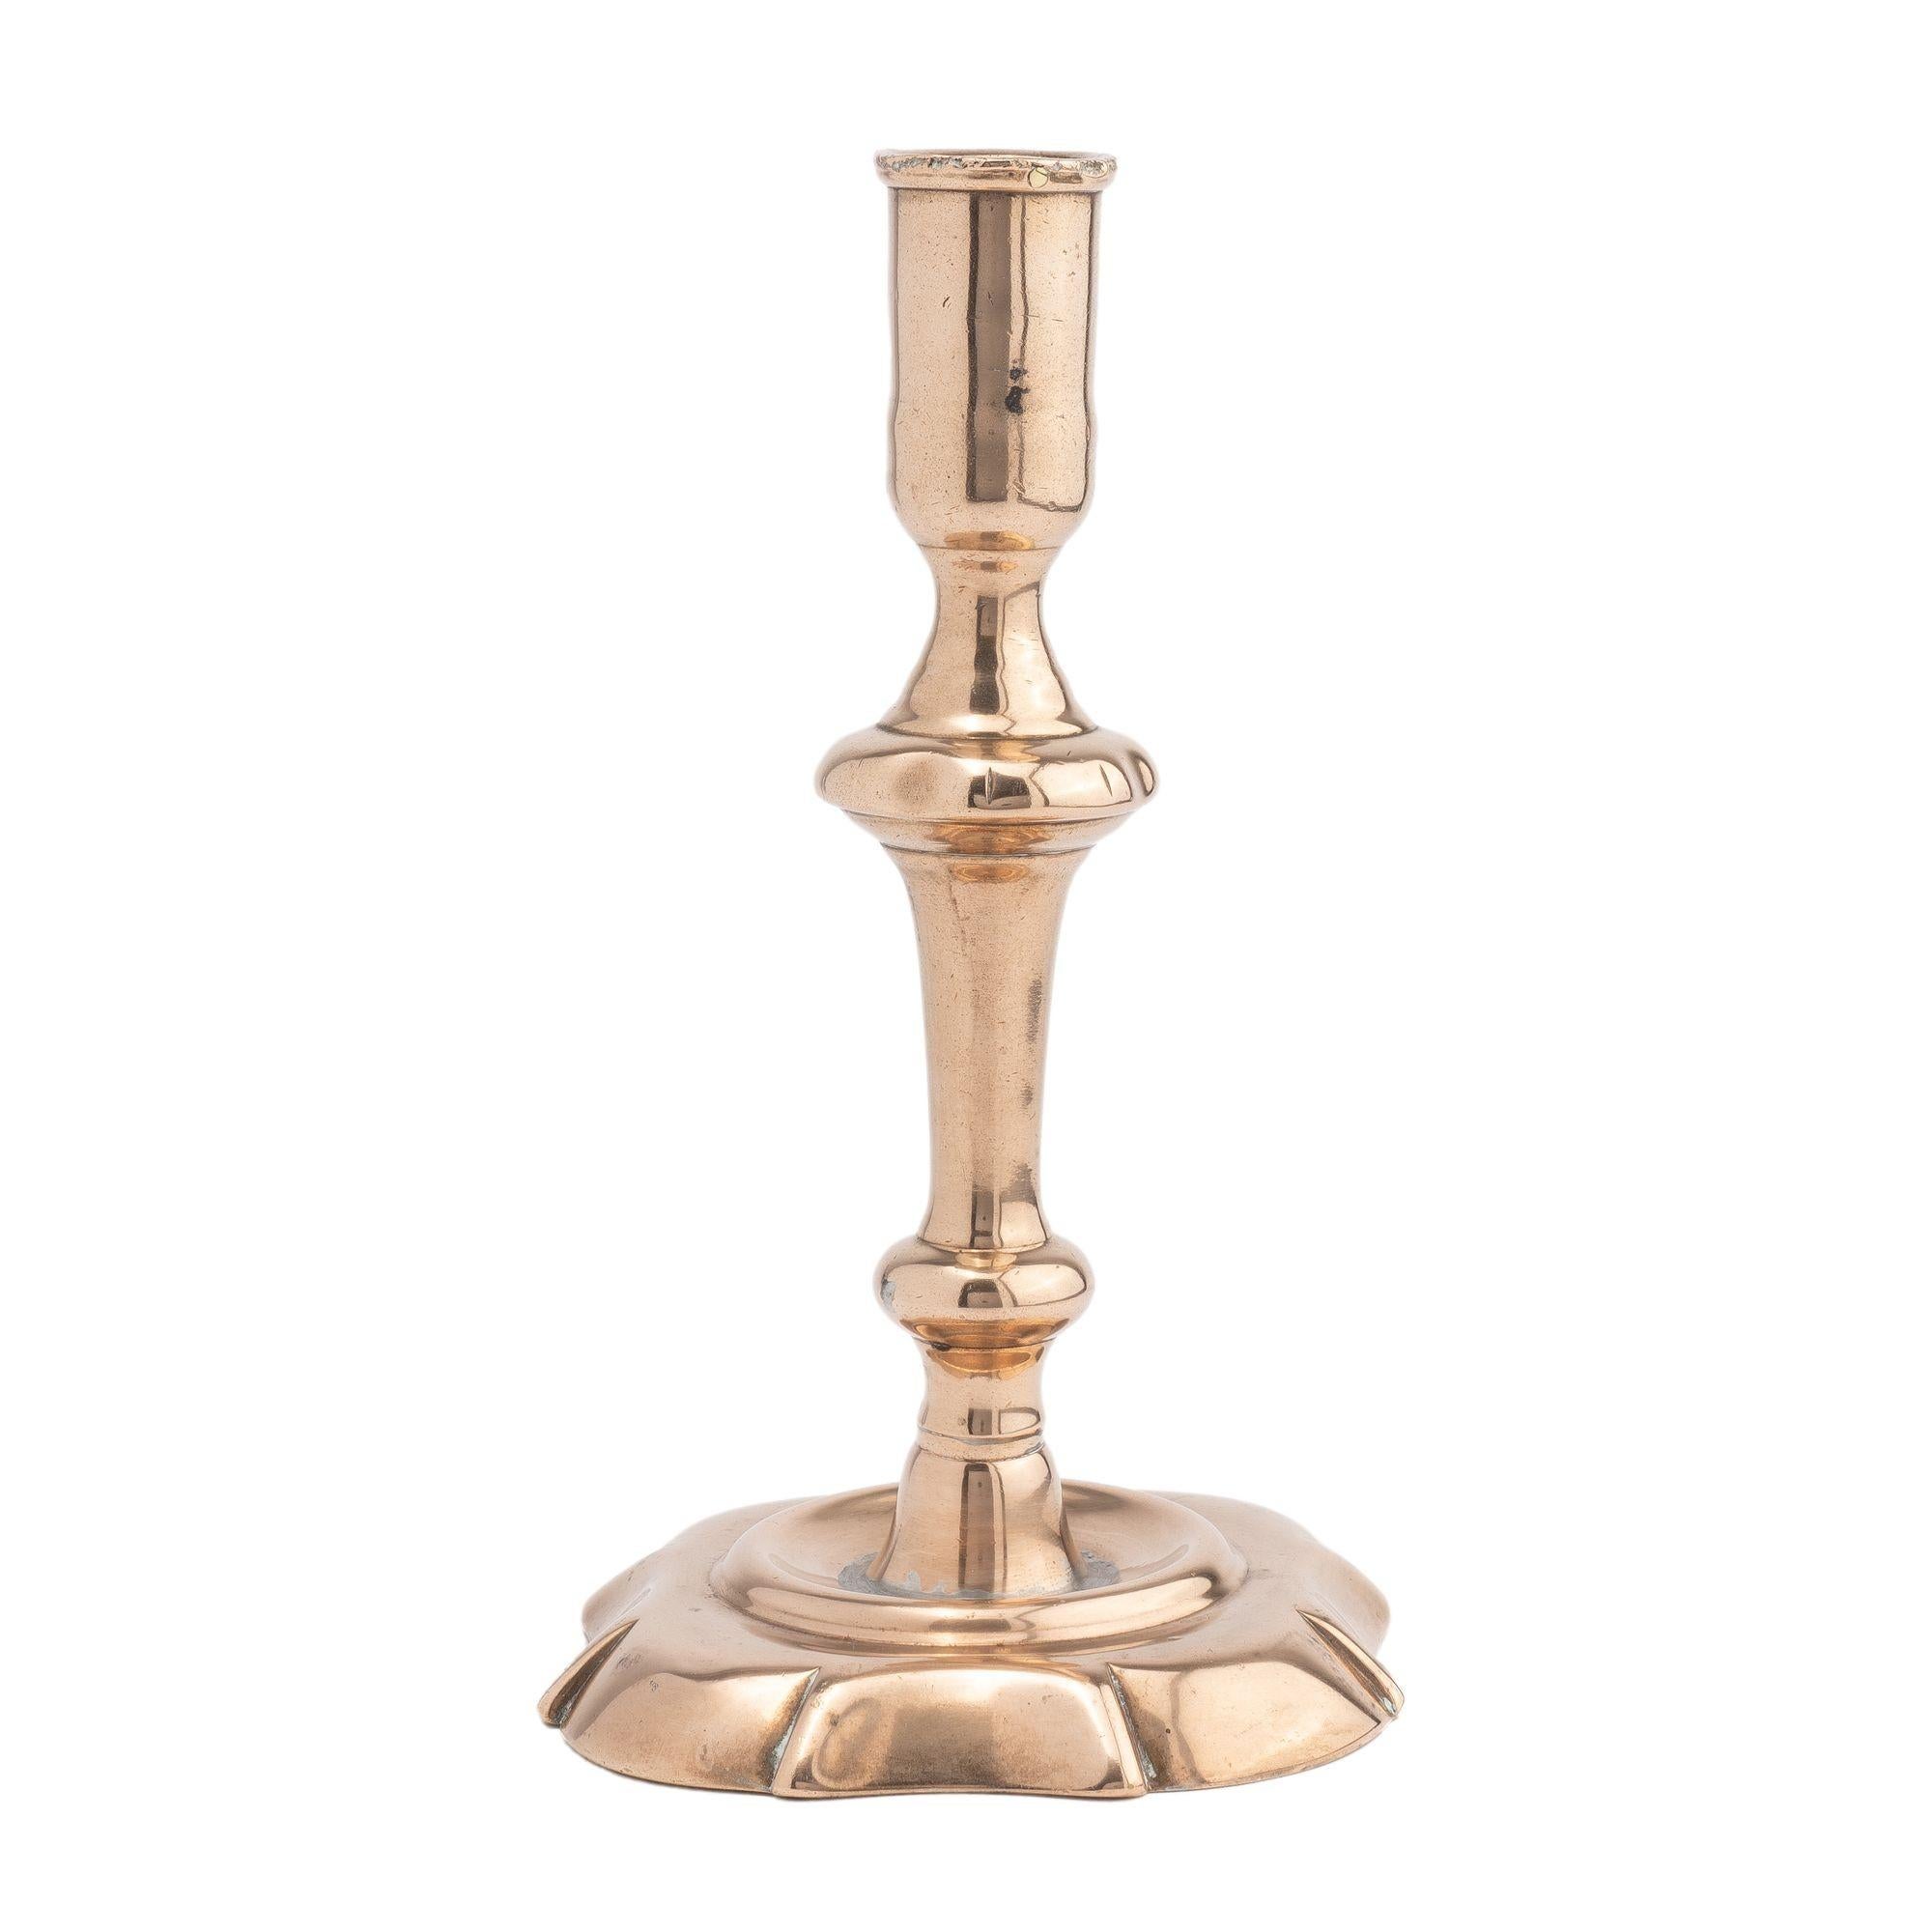 Hollow core cast bell metal brass Queen Anne candlestick. The candlestick features an elongated candle cup on a waisted turning to a lobed knob. The knob is supported by an inverted trumpet turning on a knob, waist, and corner lobe with side cut